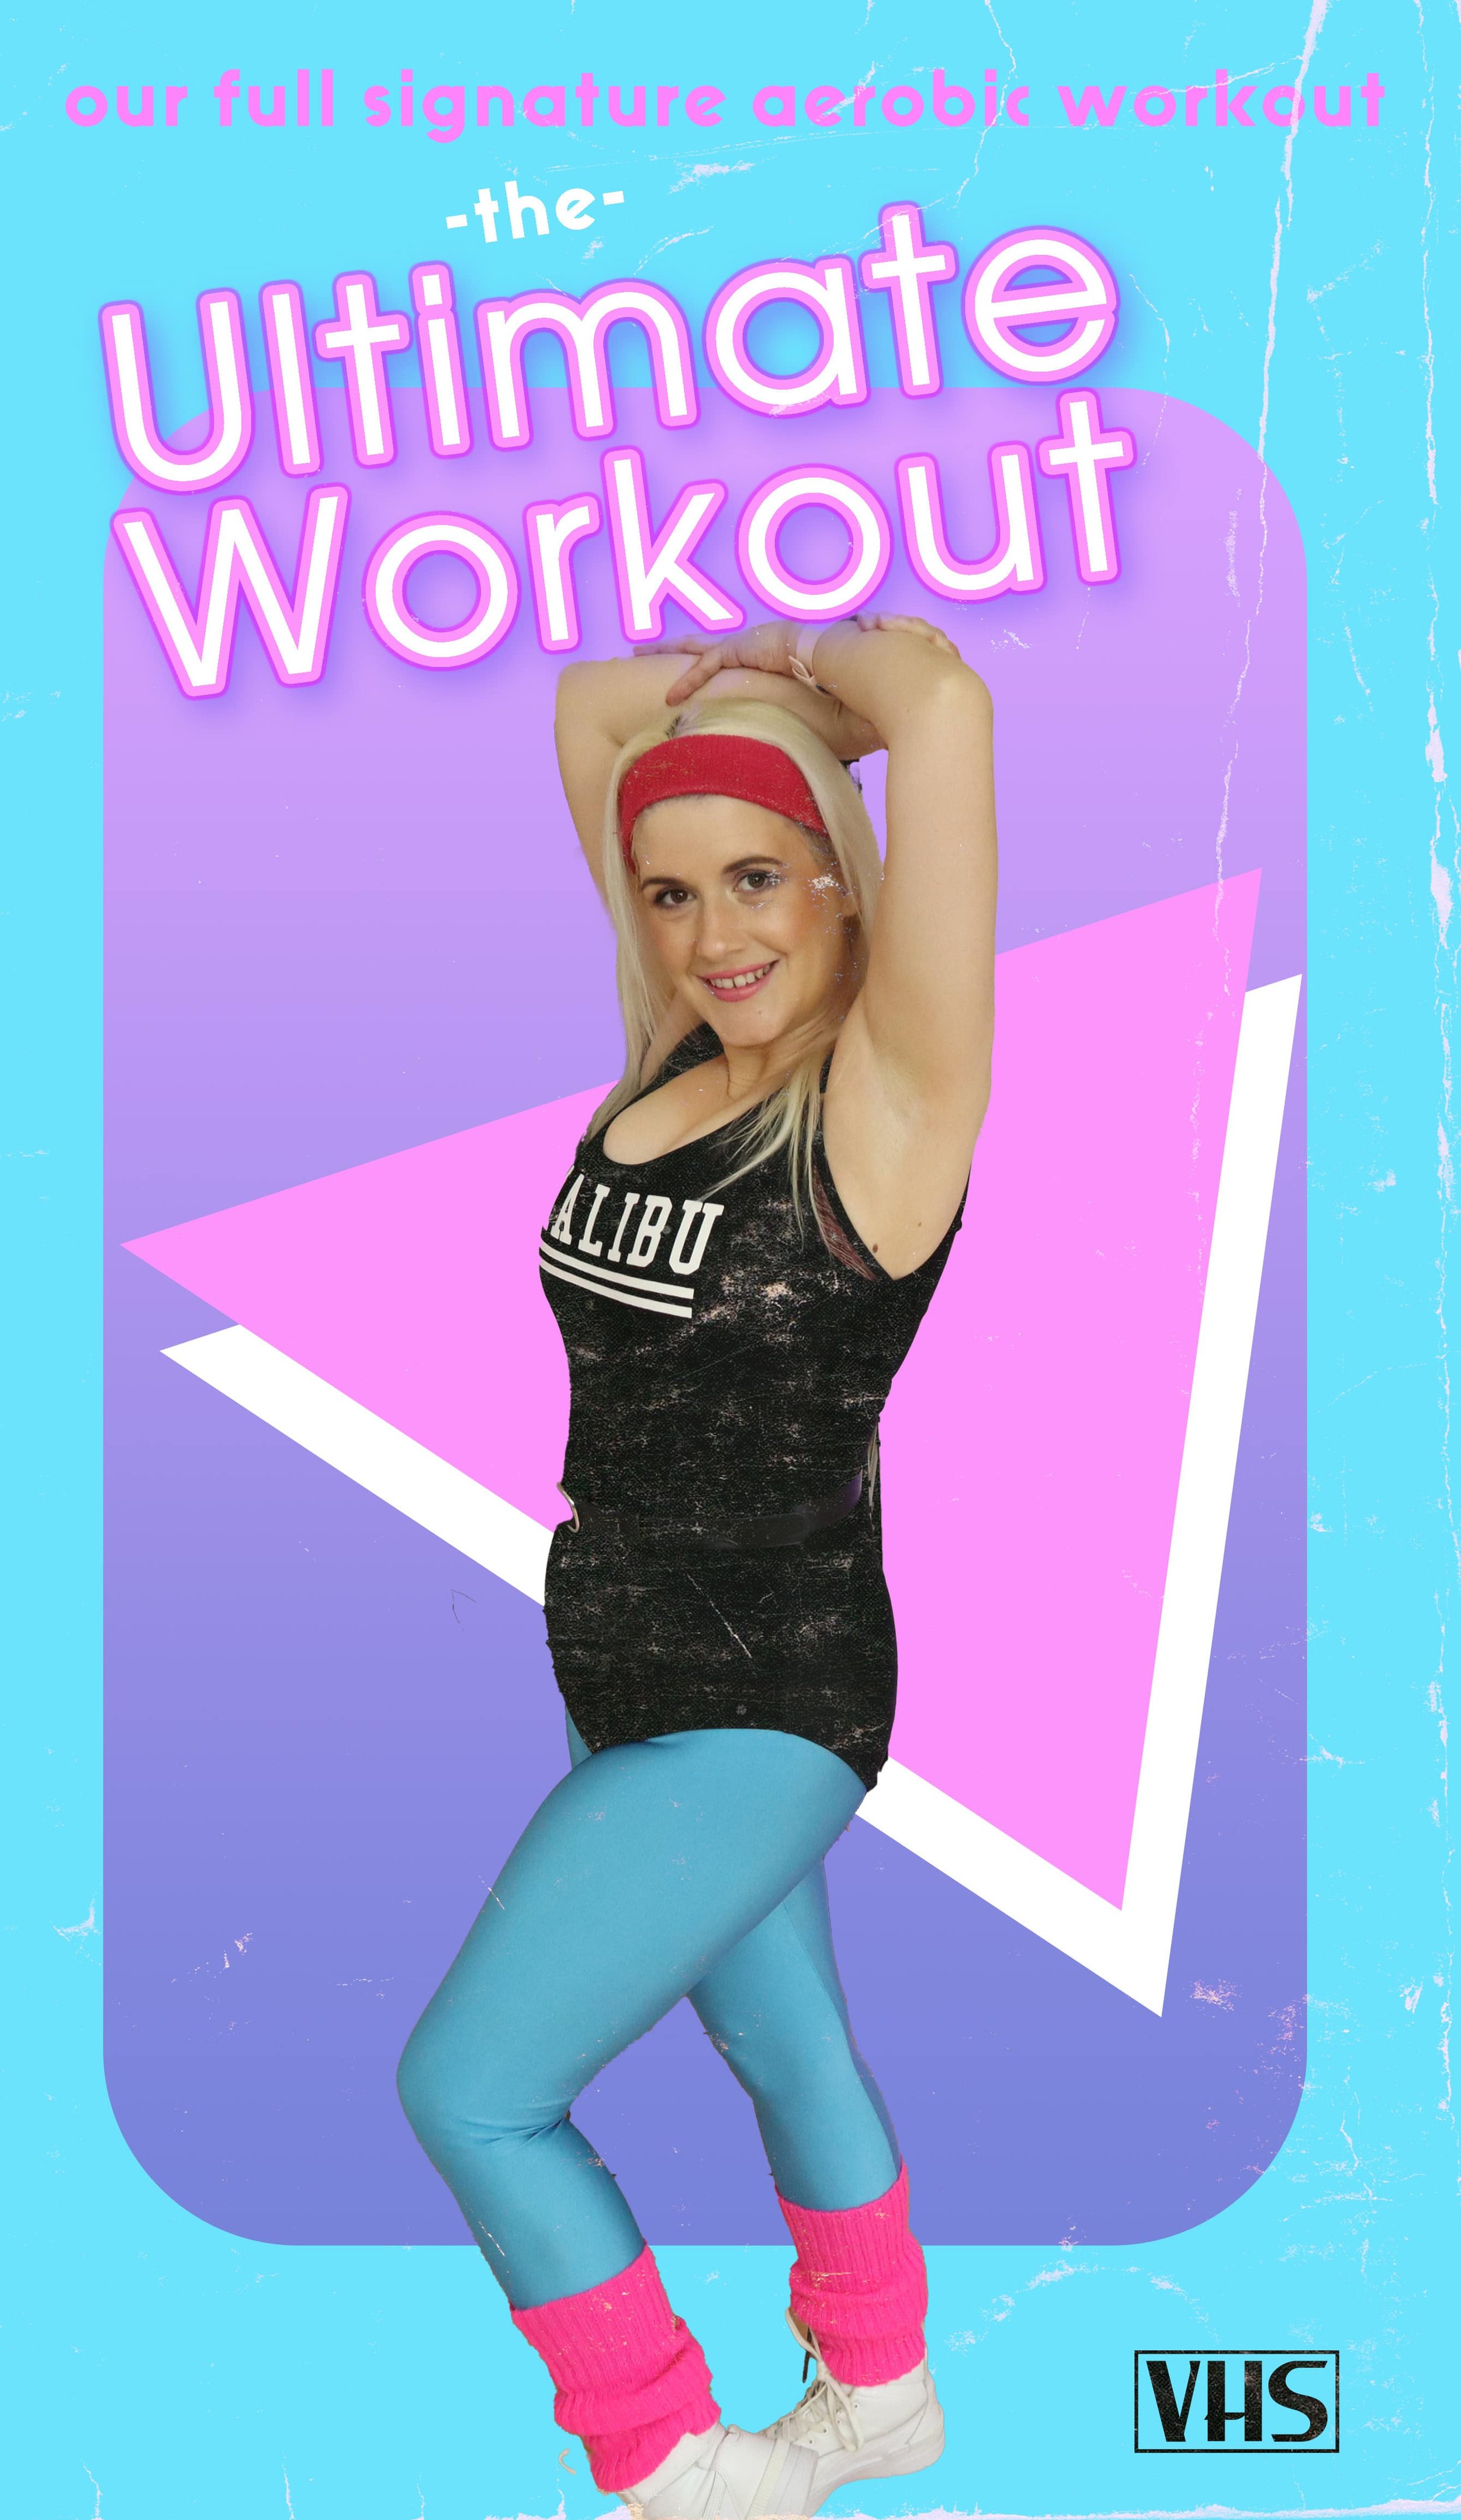 workout cover-min.jpg